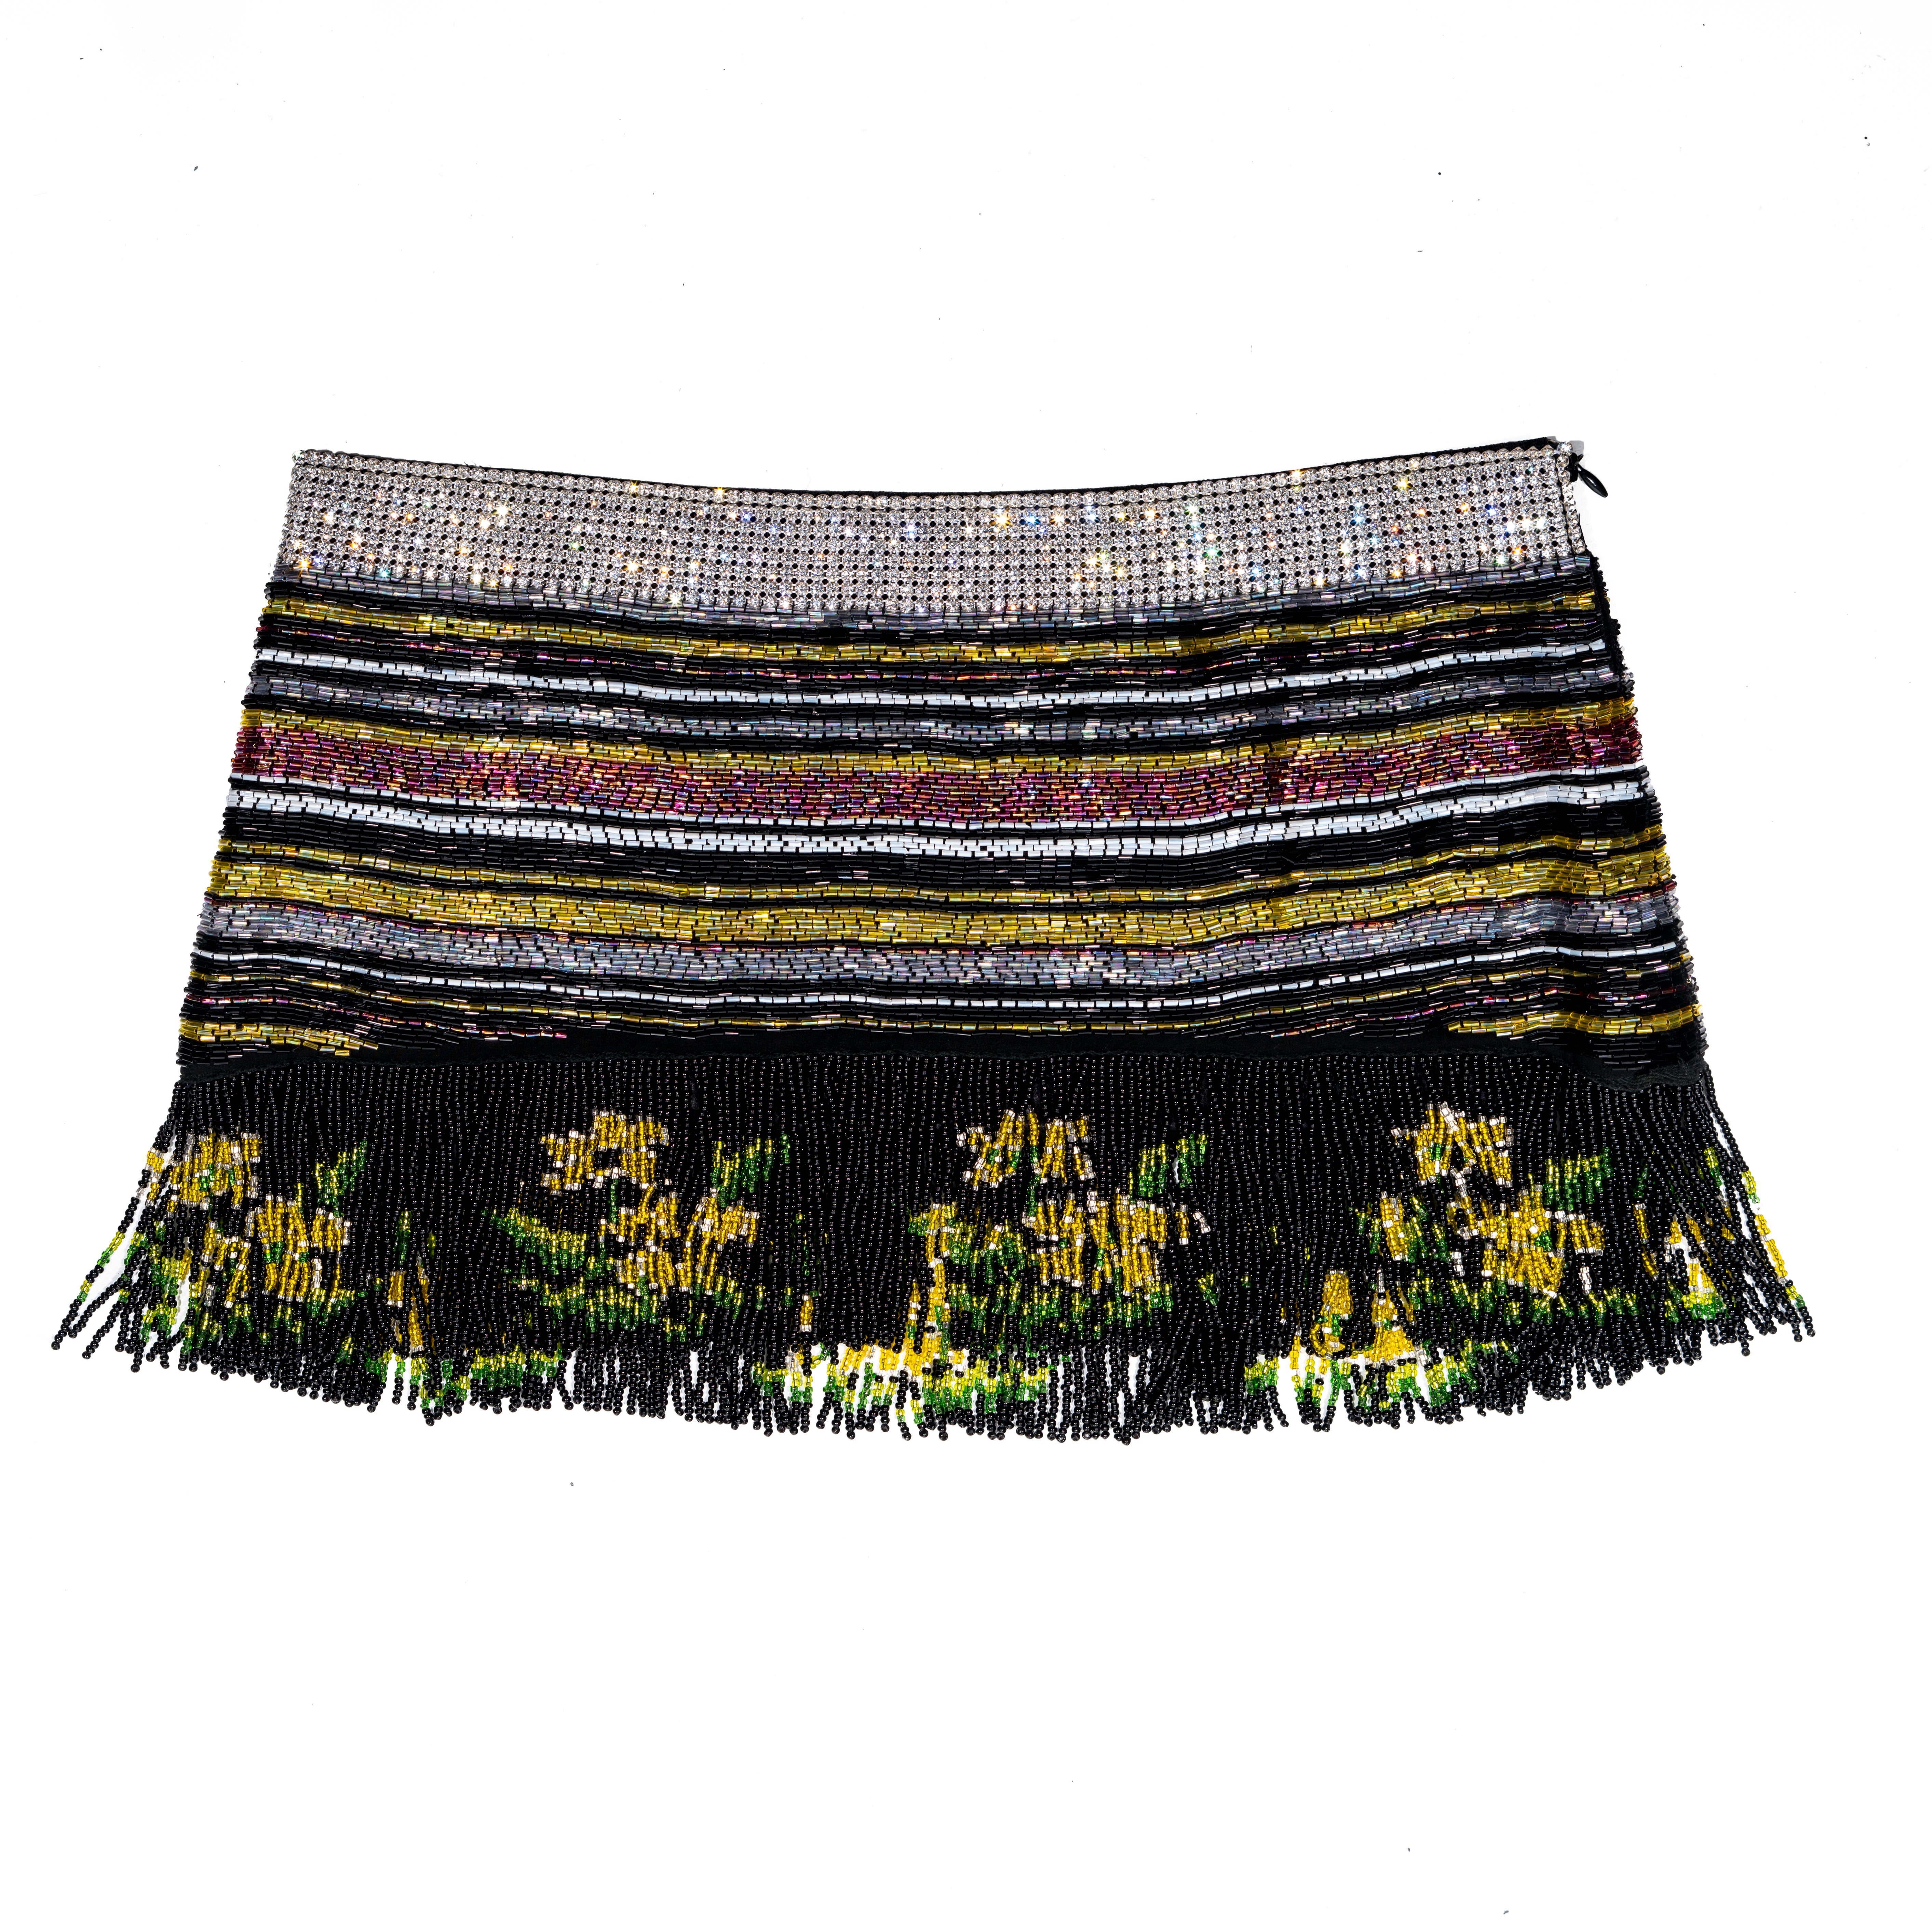 Dolce & Gabbana beaded mini skirt with crystals and tassels, ss 2000